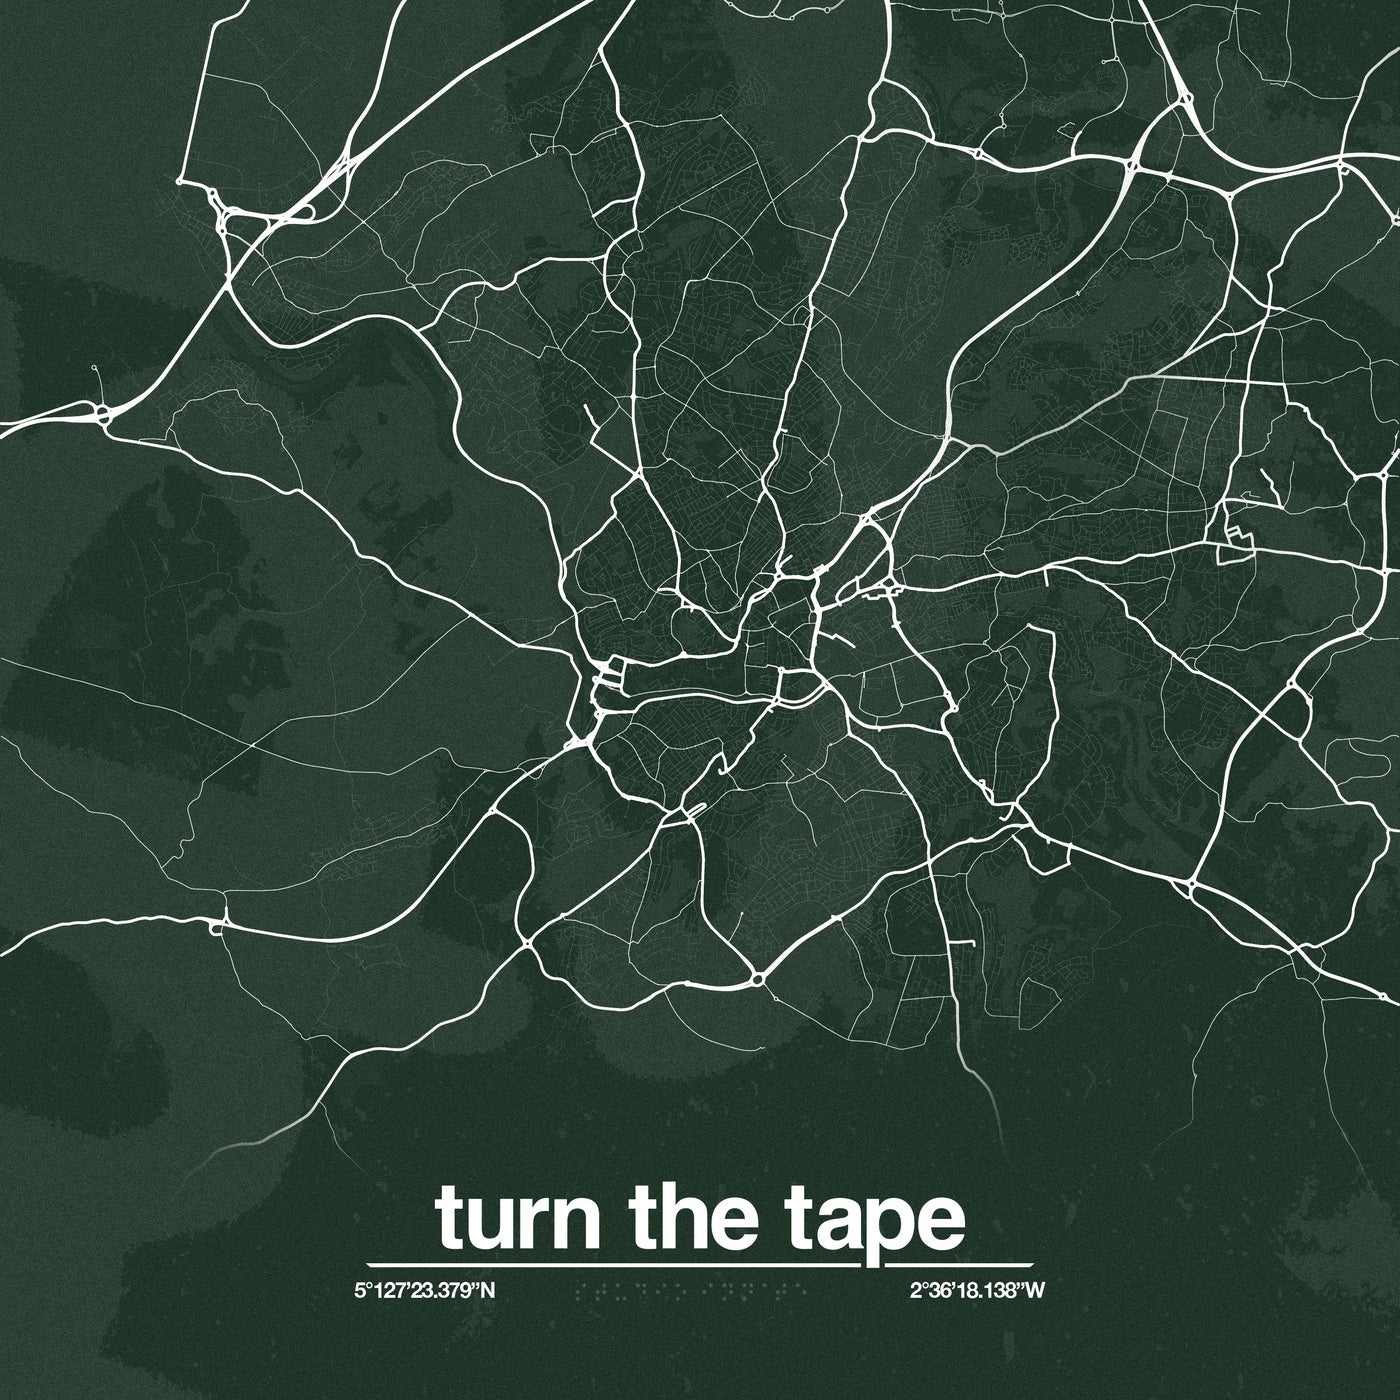 Turn the Tape